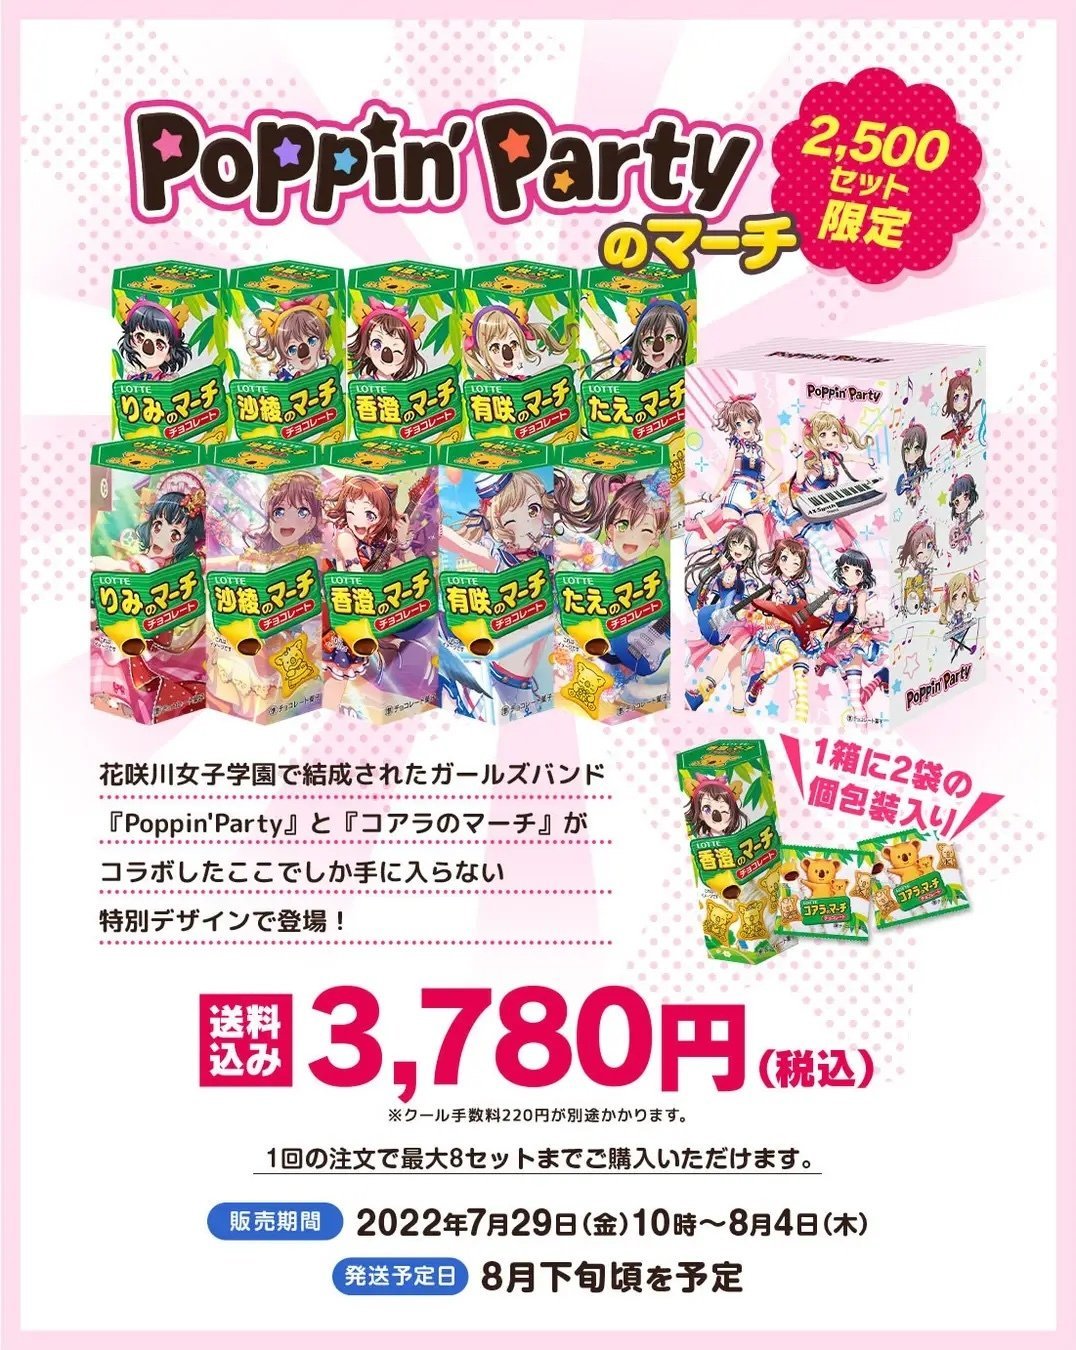 "Poppin’Partyのマーチ" 